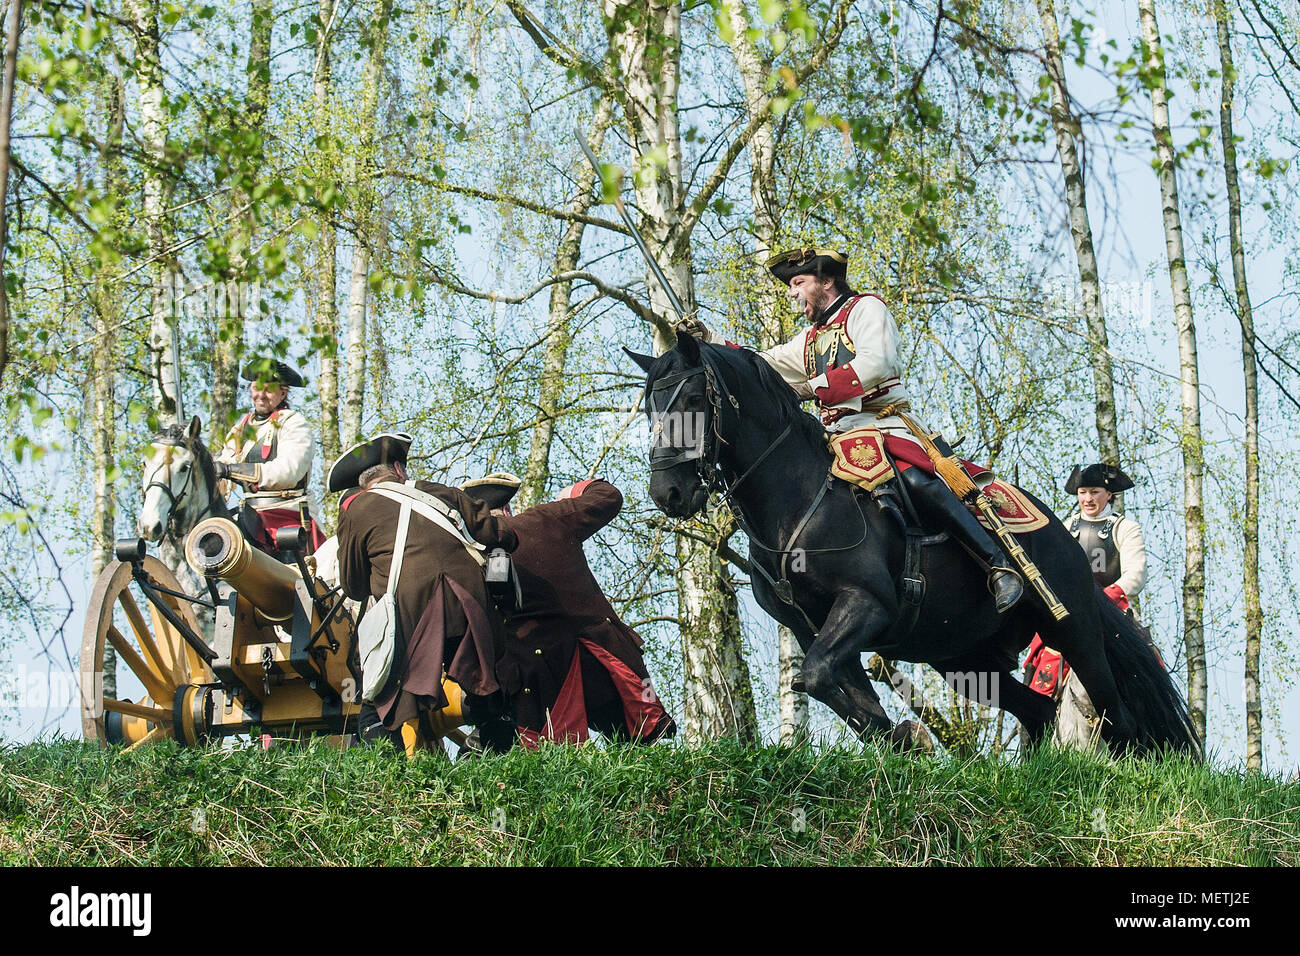 Liberec, Czech Republic. 21st Apr, 2018. Reconstruction of the Battle of Reichenberg, fought on 21 April 1757 within the Third Silesian War, was held in Liberec-Vesec, Czech Republic, on April 21, 2018. Credit: Radek Petrasek/CTK Photo/Alamy Live News Stock Photo